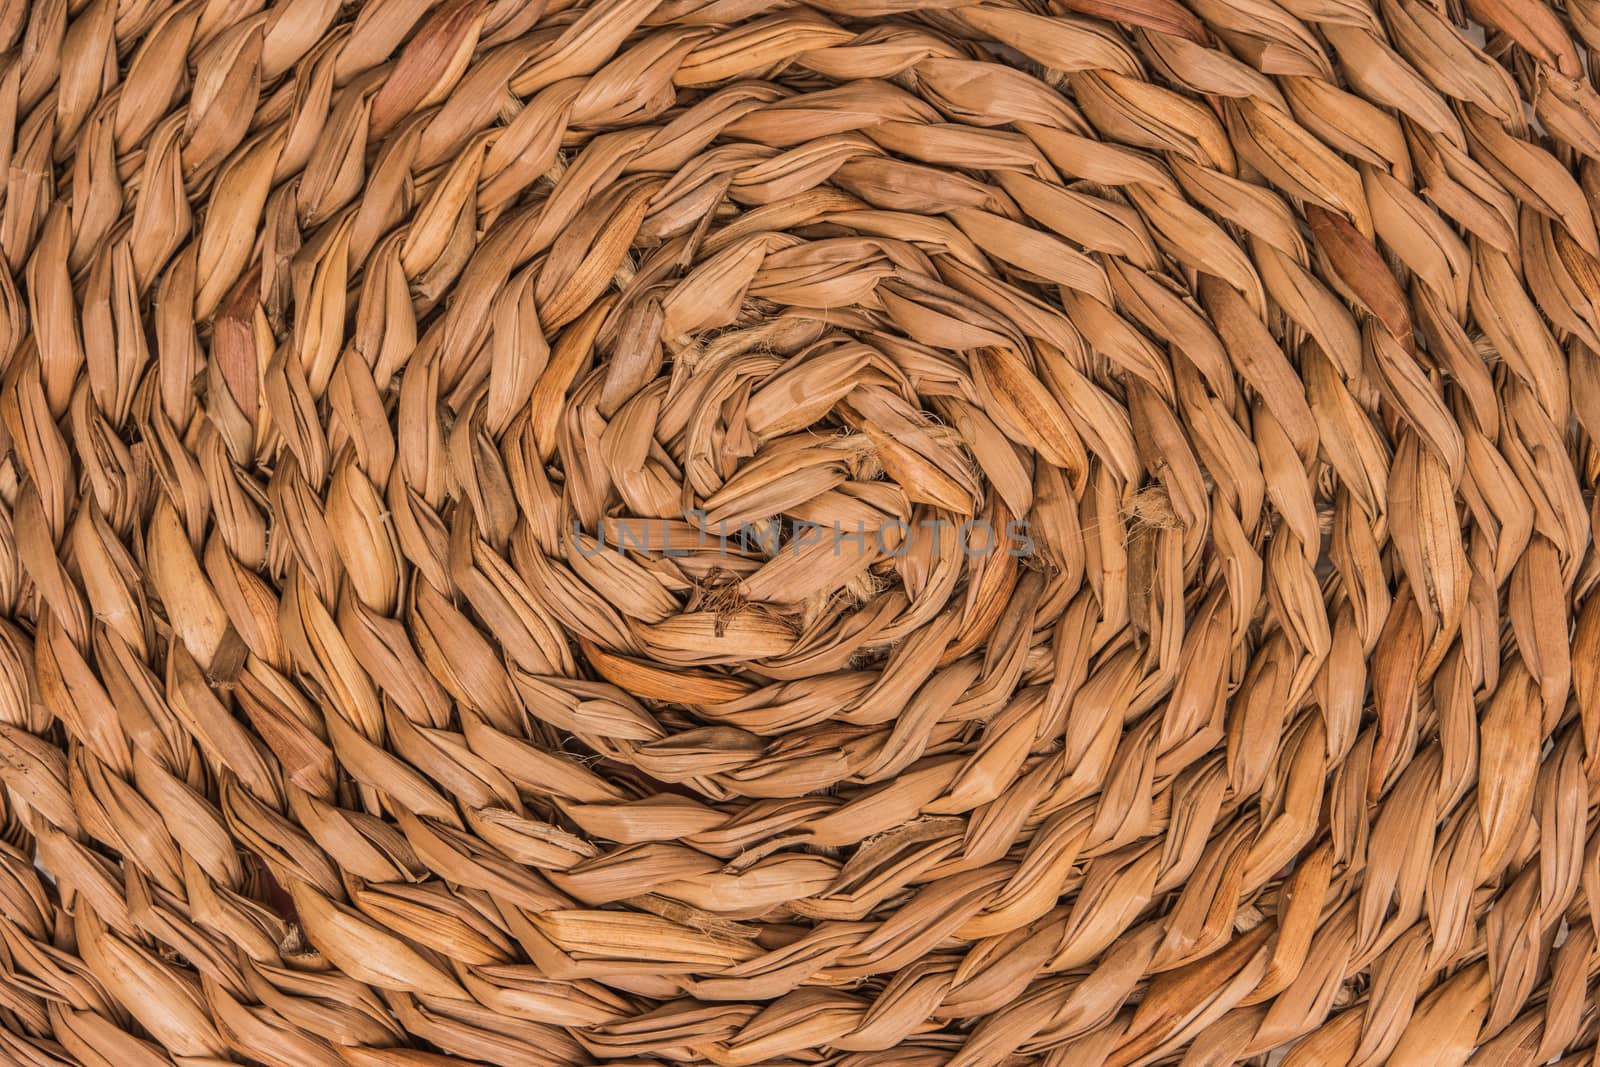 Wicker woven pattern for abstract background or texture. Wicker place mat. 